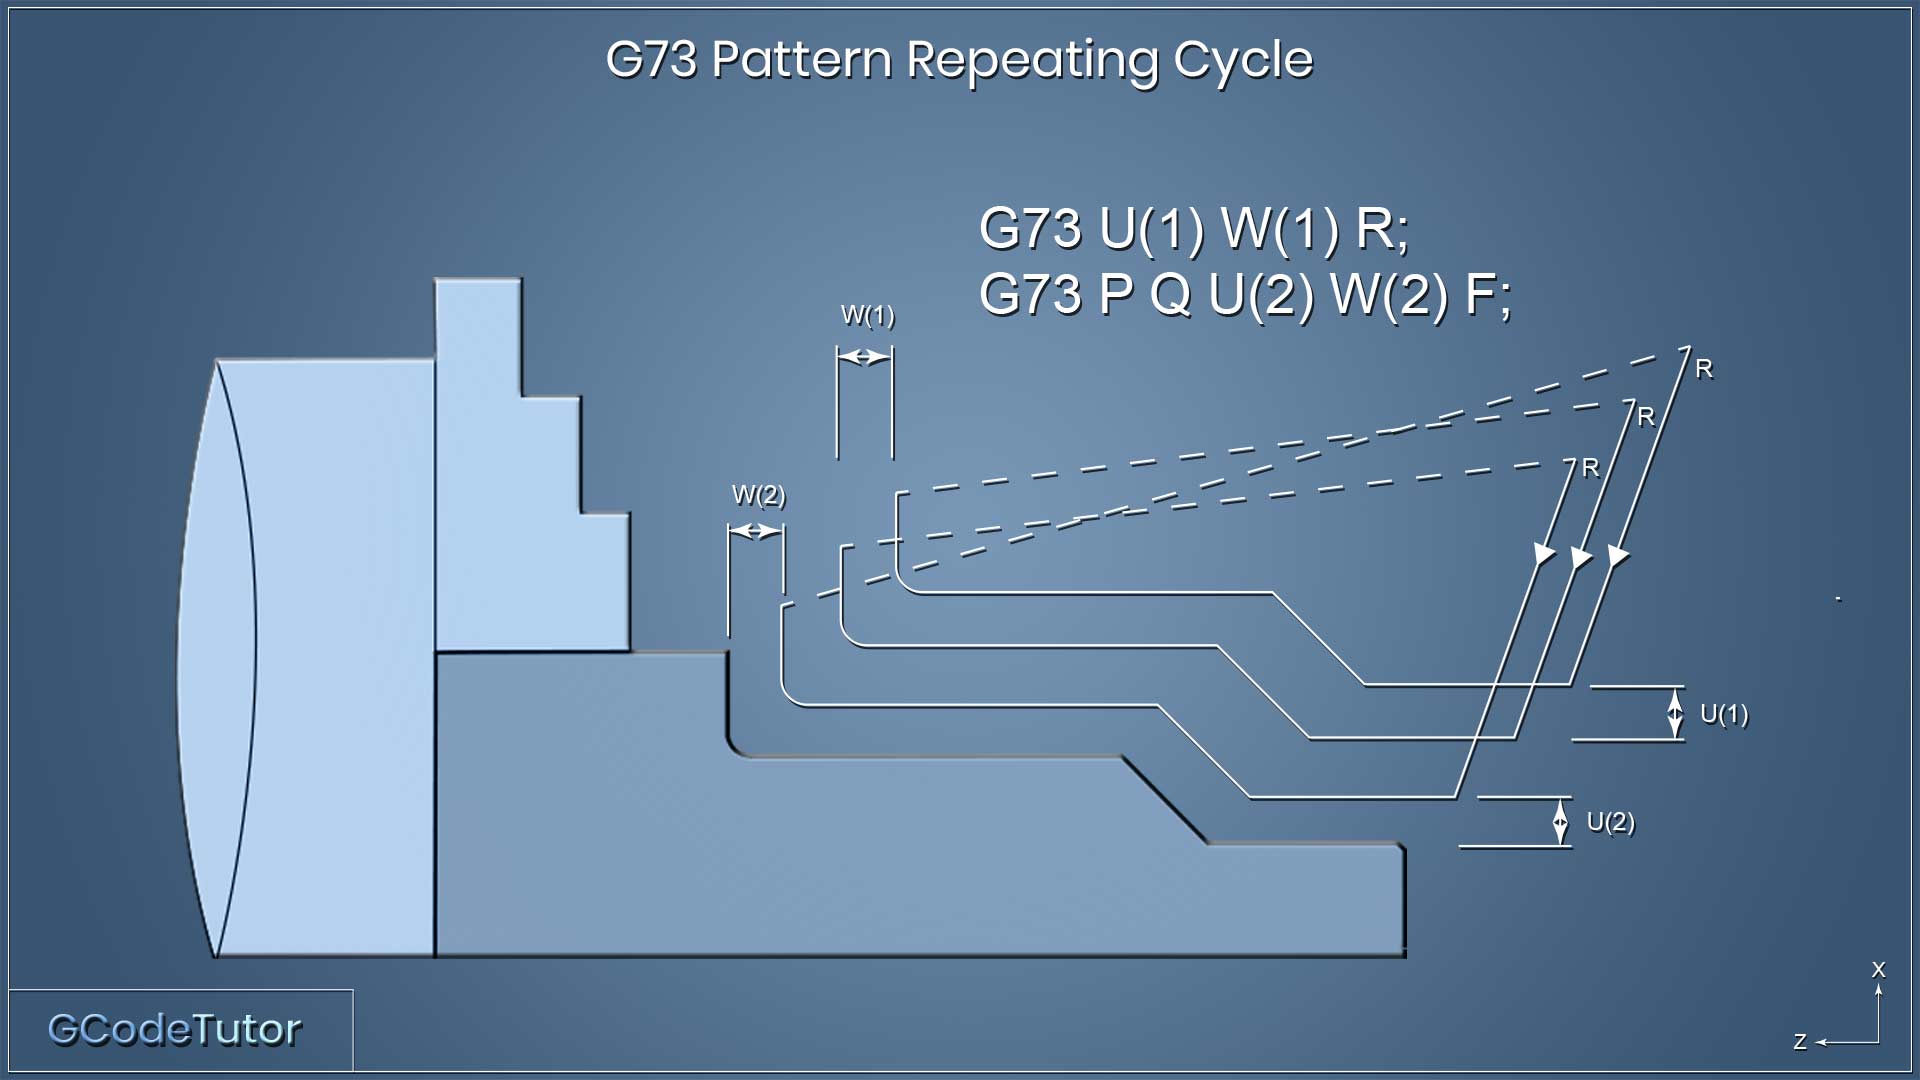 G73 pattern repeating roughing cycle